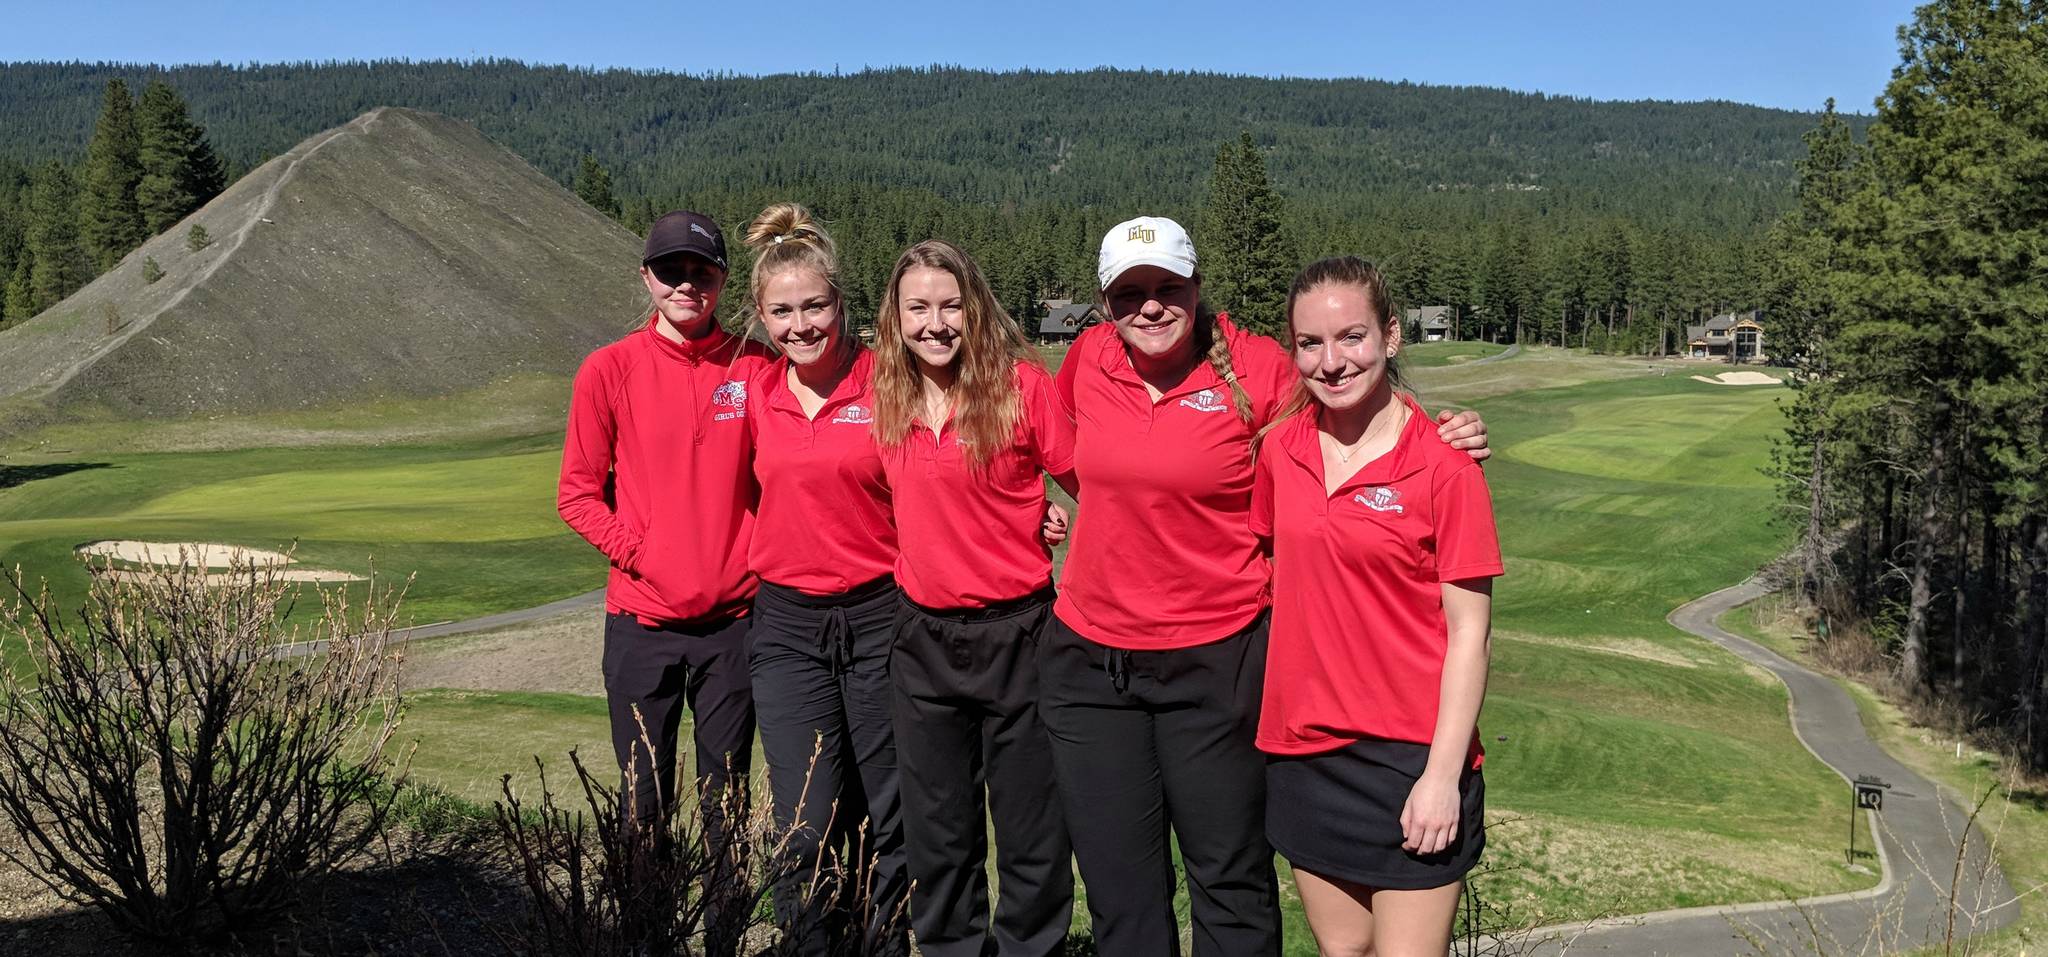 Mount Si’s girls golf team placed eighth at the recent 12th annual Suncadia Invitational at the Suncadia Resort & Spa in Cle Elum. The field consisted of 105 players from 23 schools across Washington. Mount Si’s Kat Hodgson finished tied for sixth overall, shooting a 4-over 76. Also participating in the event from Mount Si were Tori Berger, Emma Fougere, Annie Burns and Dana Kenow. Photo courtesy of Steve Botulinski